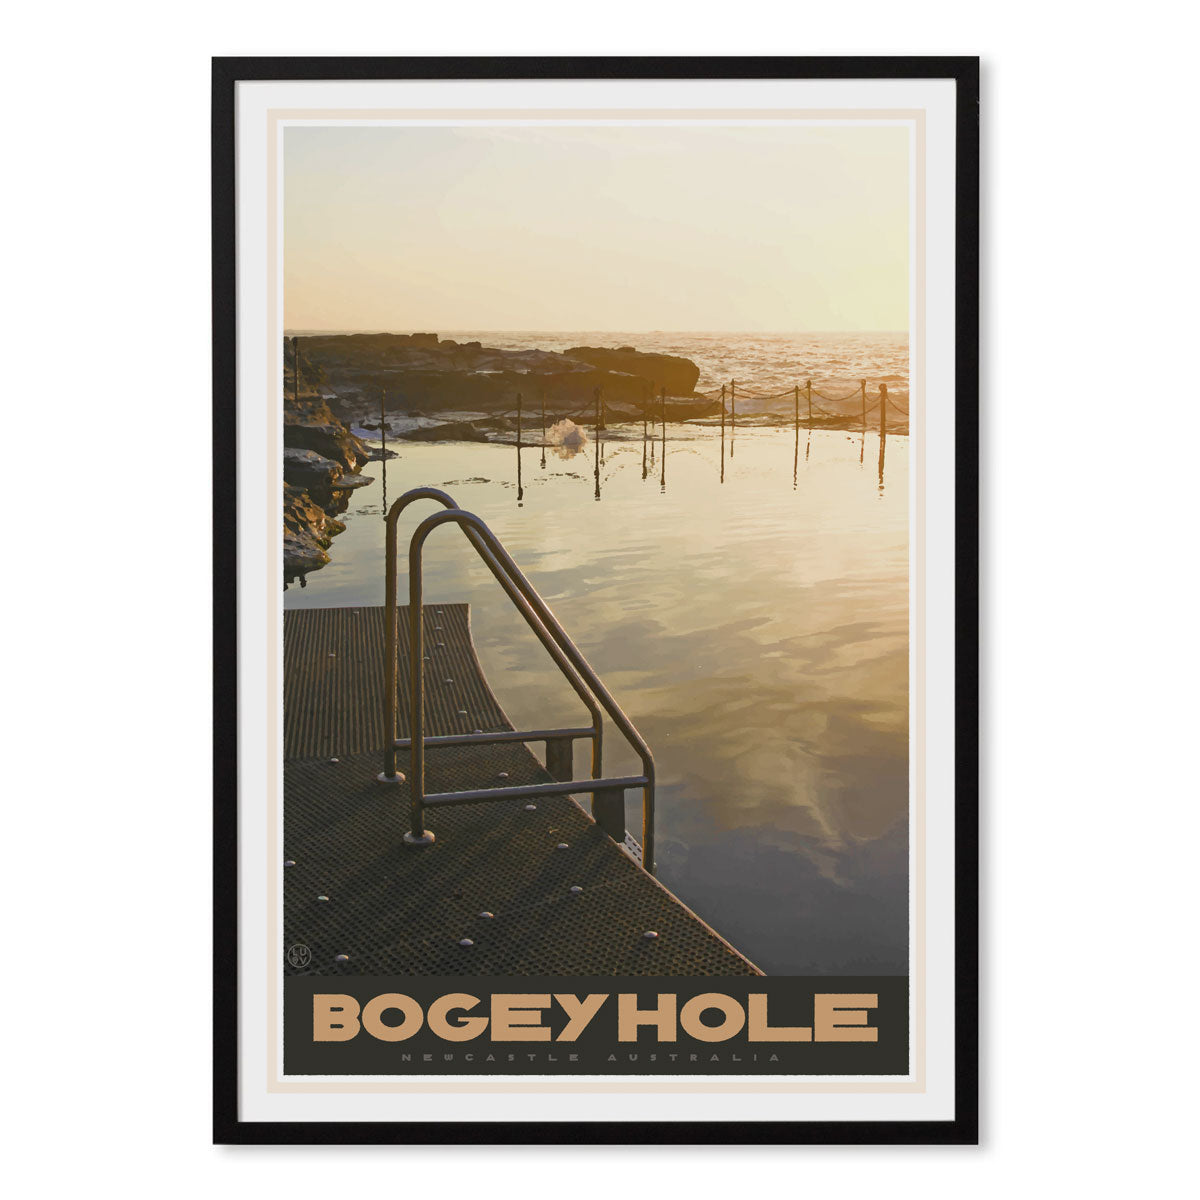 Newcastle Bogey Hole vintage travel style black framed print by places we luv